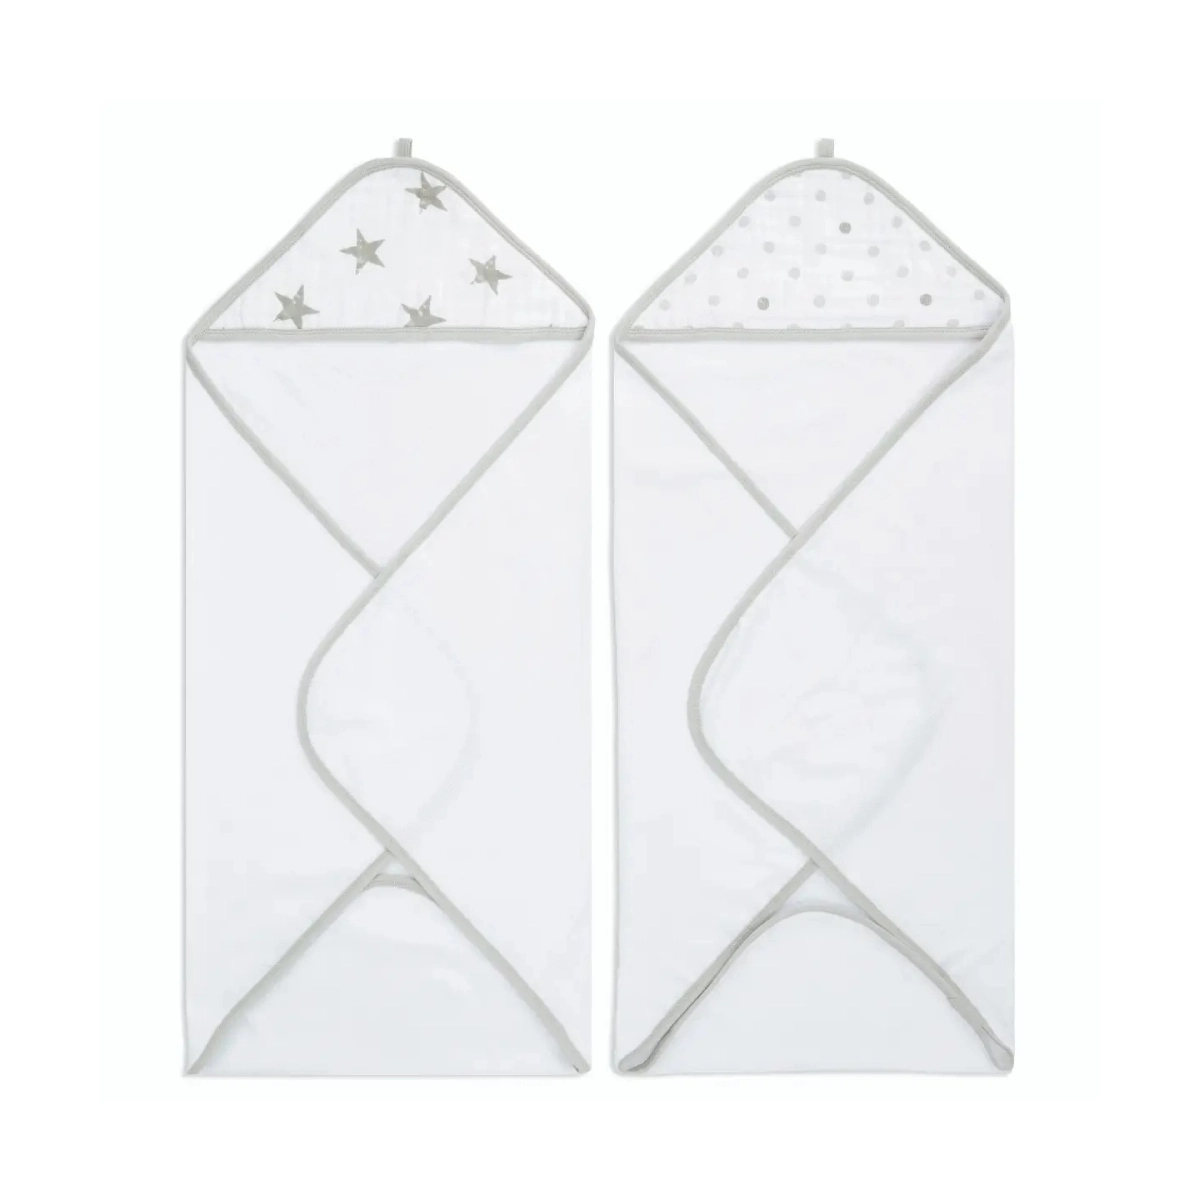 Aden + Anais Pack of 2 Essential Hooded Towel